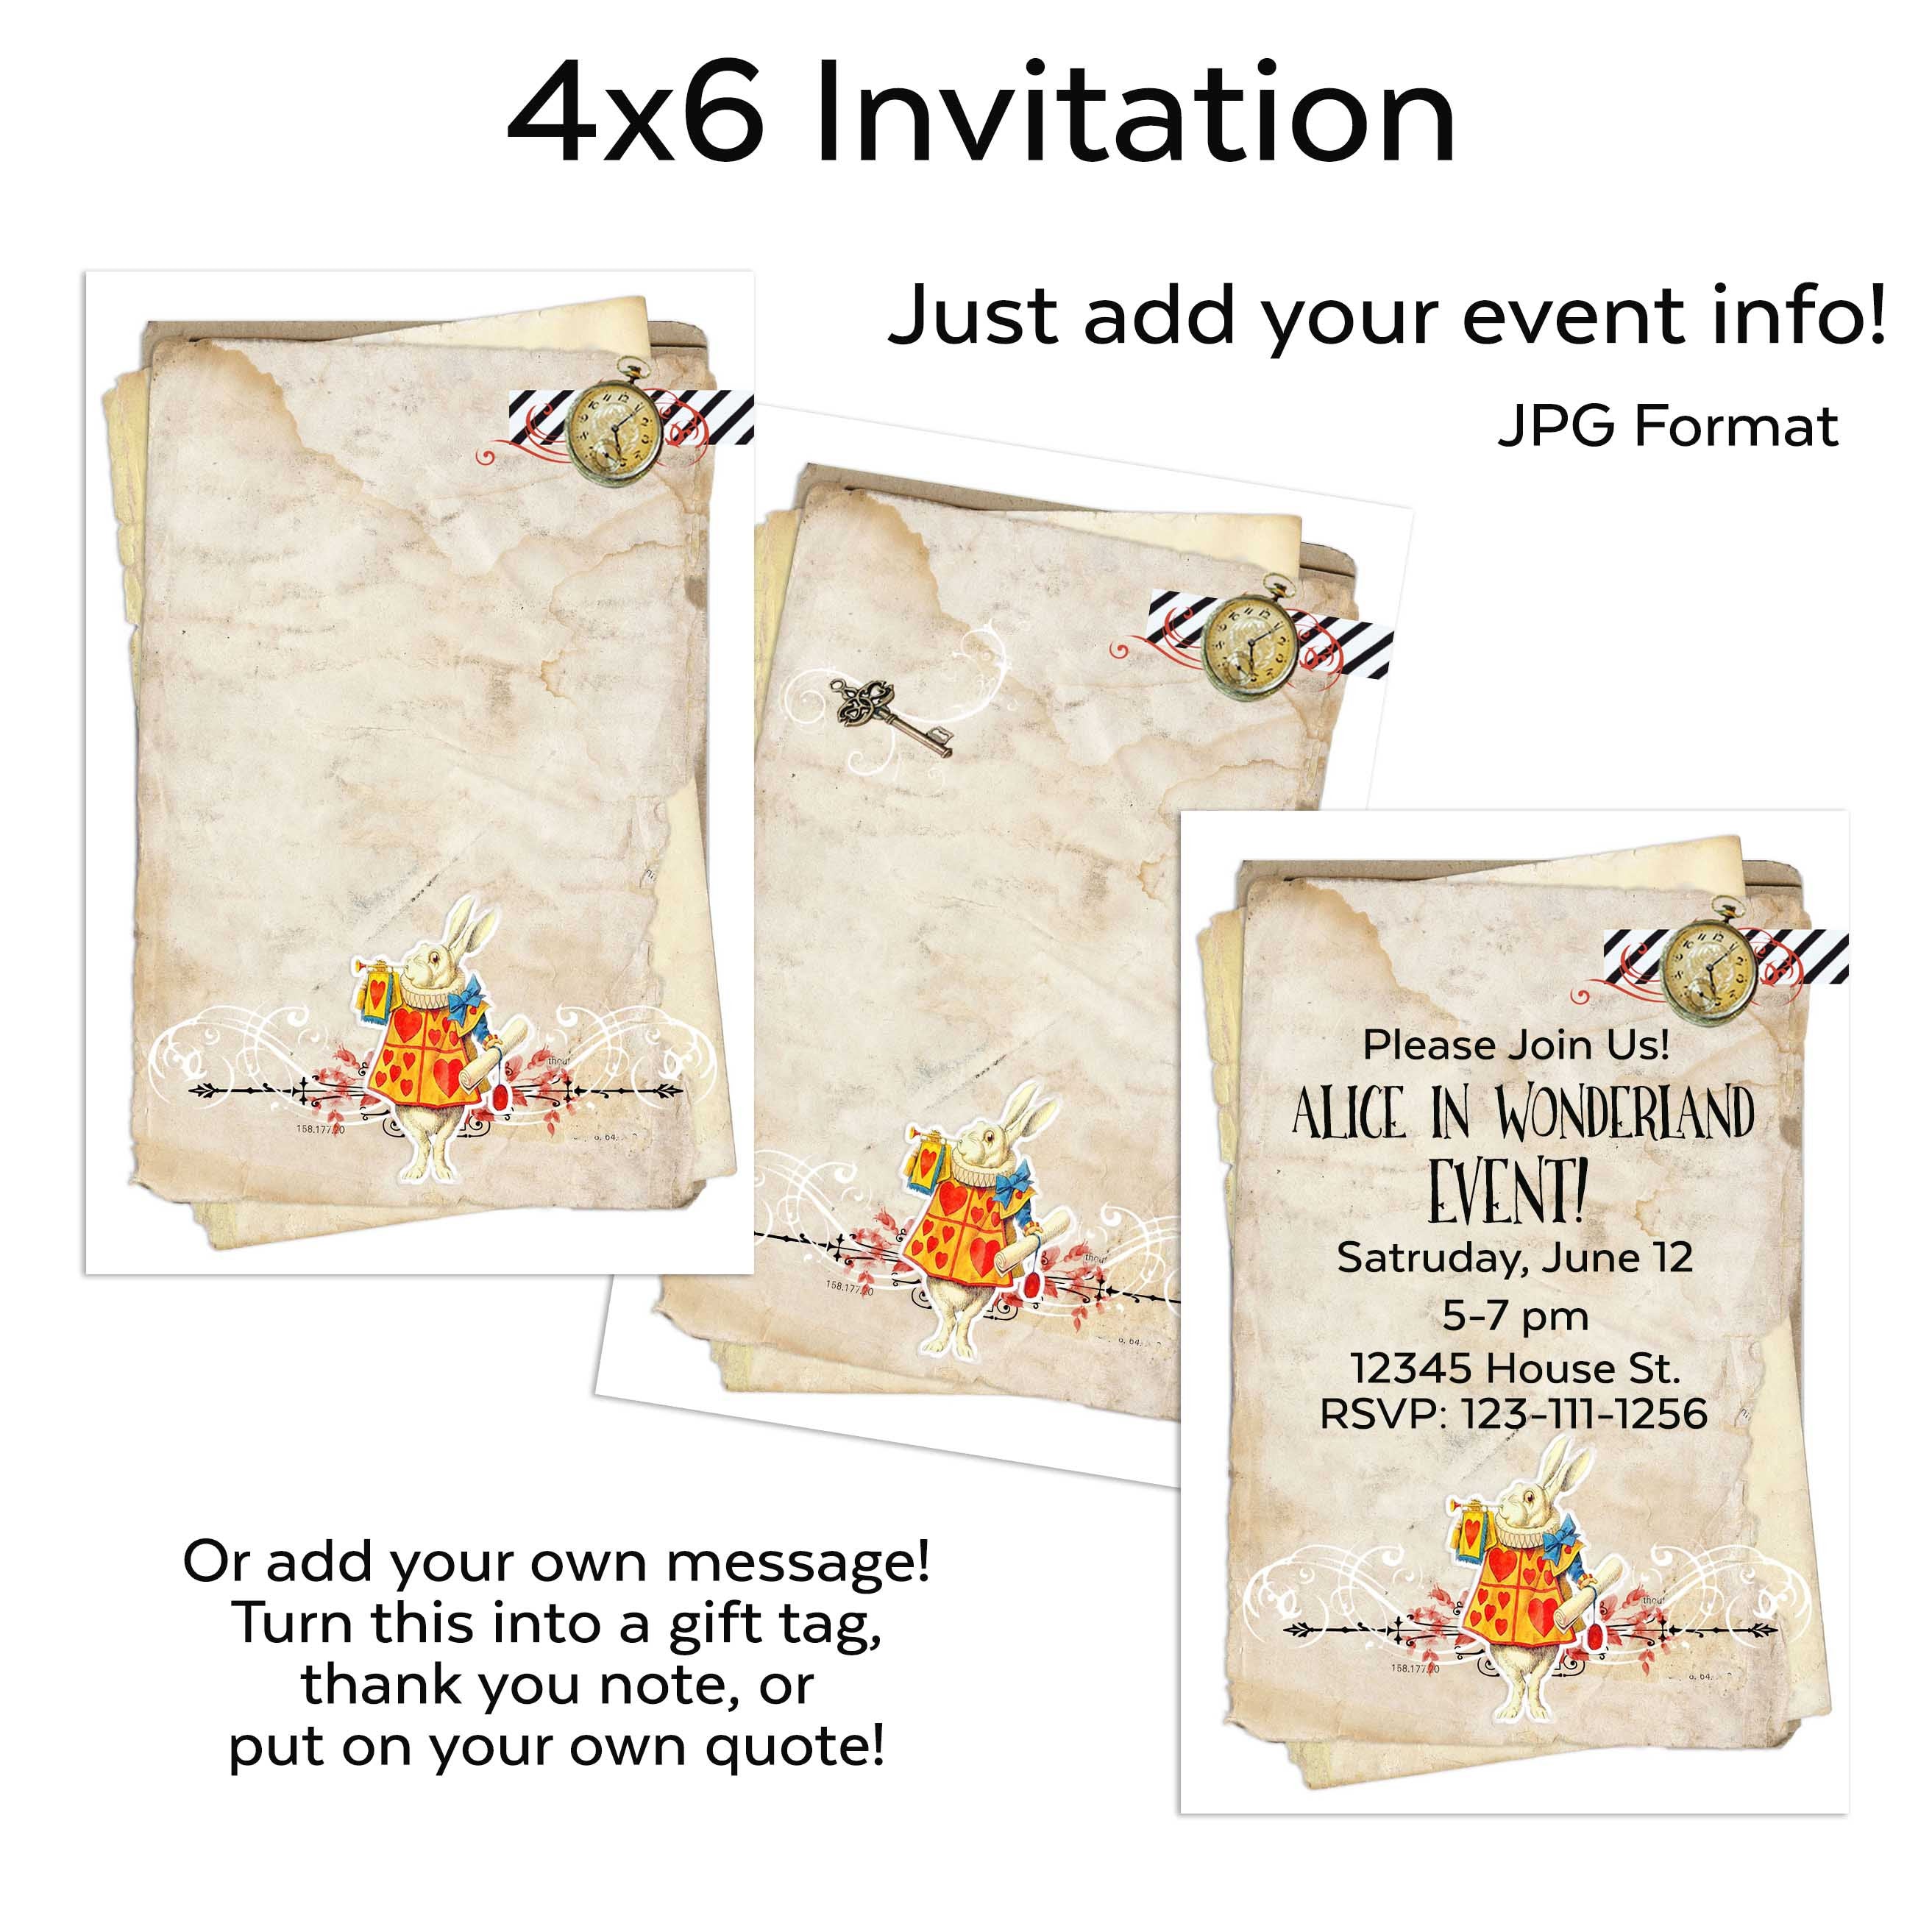 Alice in Wonderland Party Decorations & Games Printable Kit